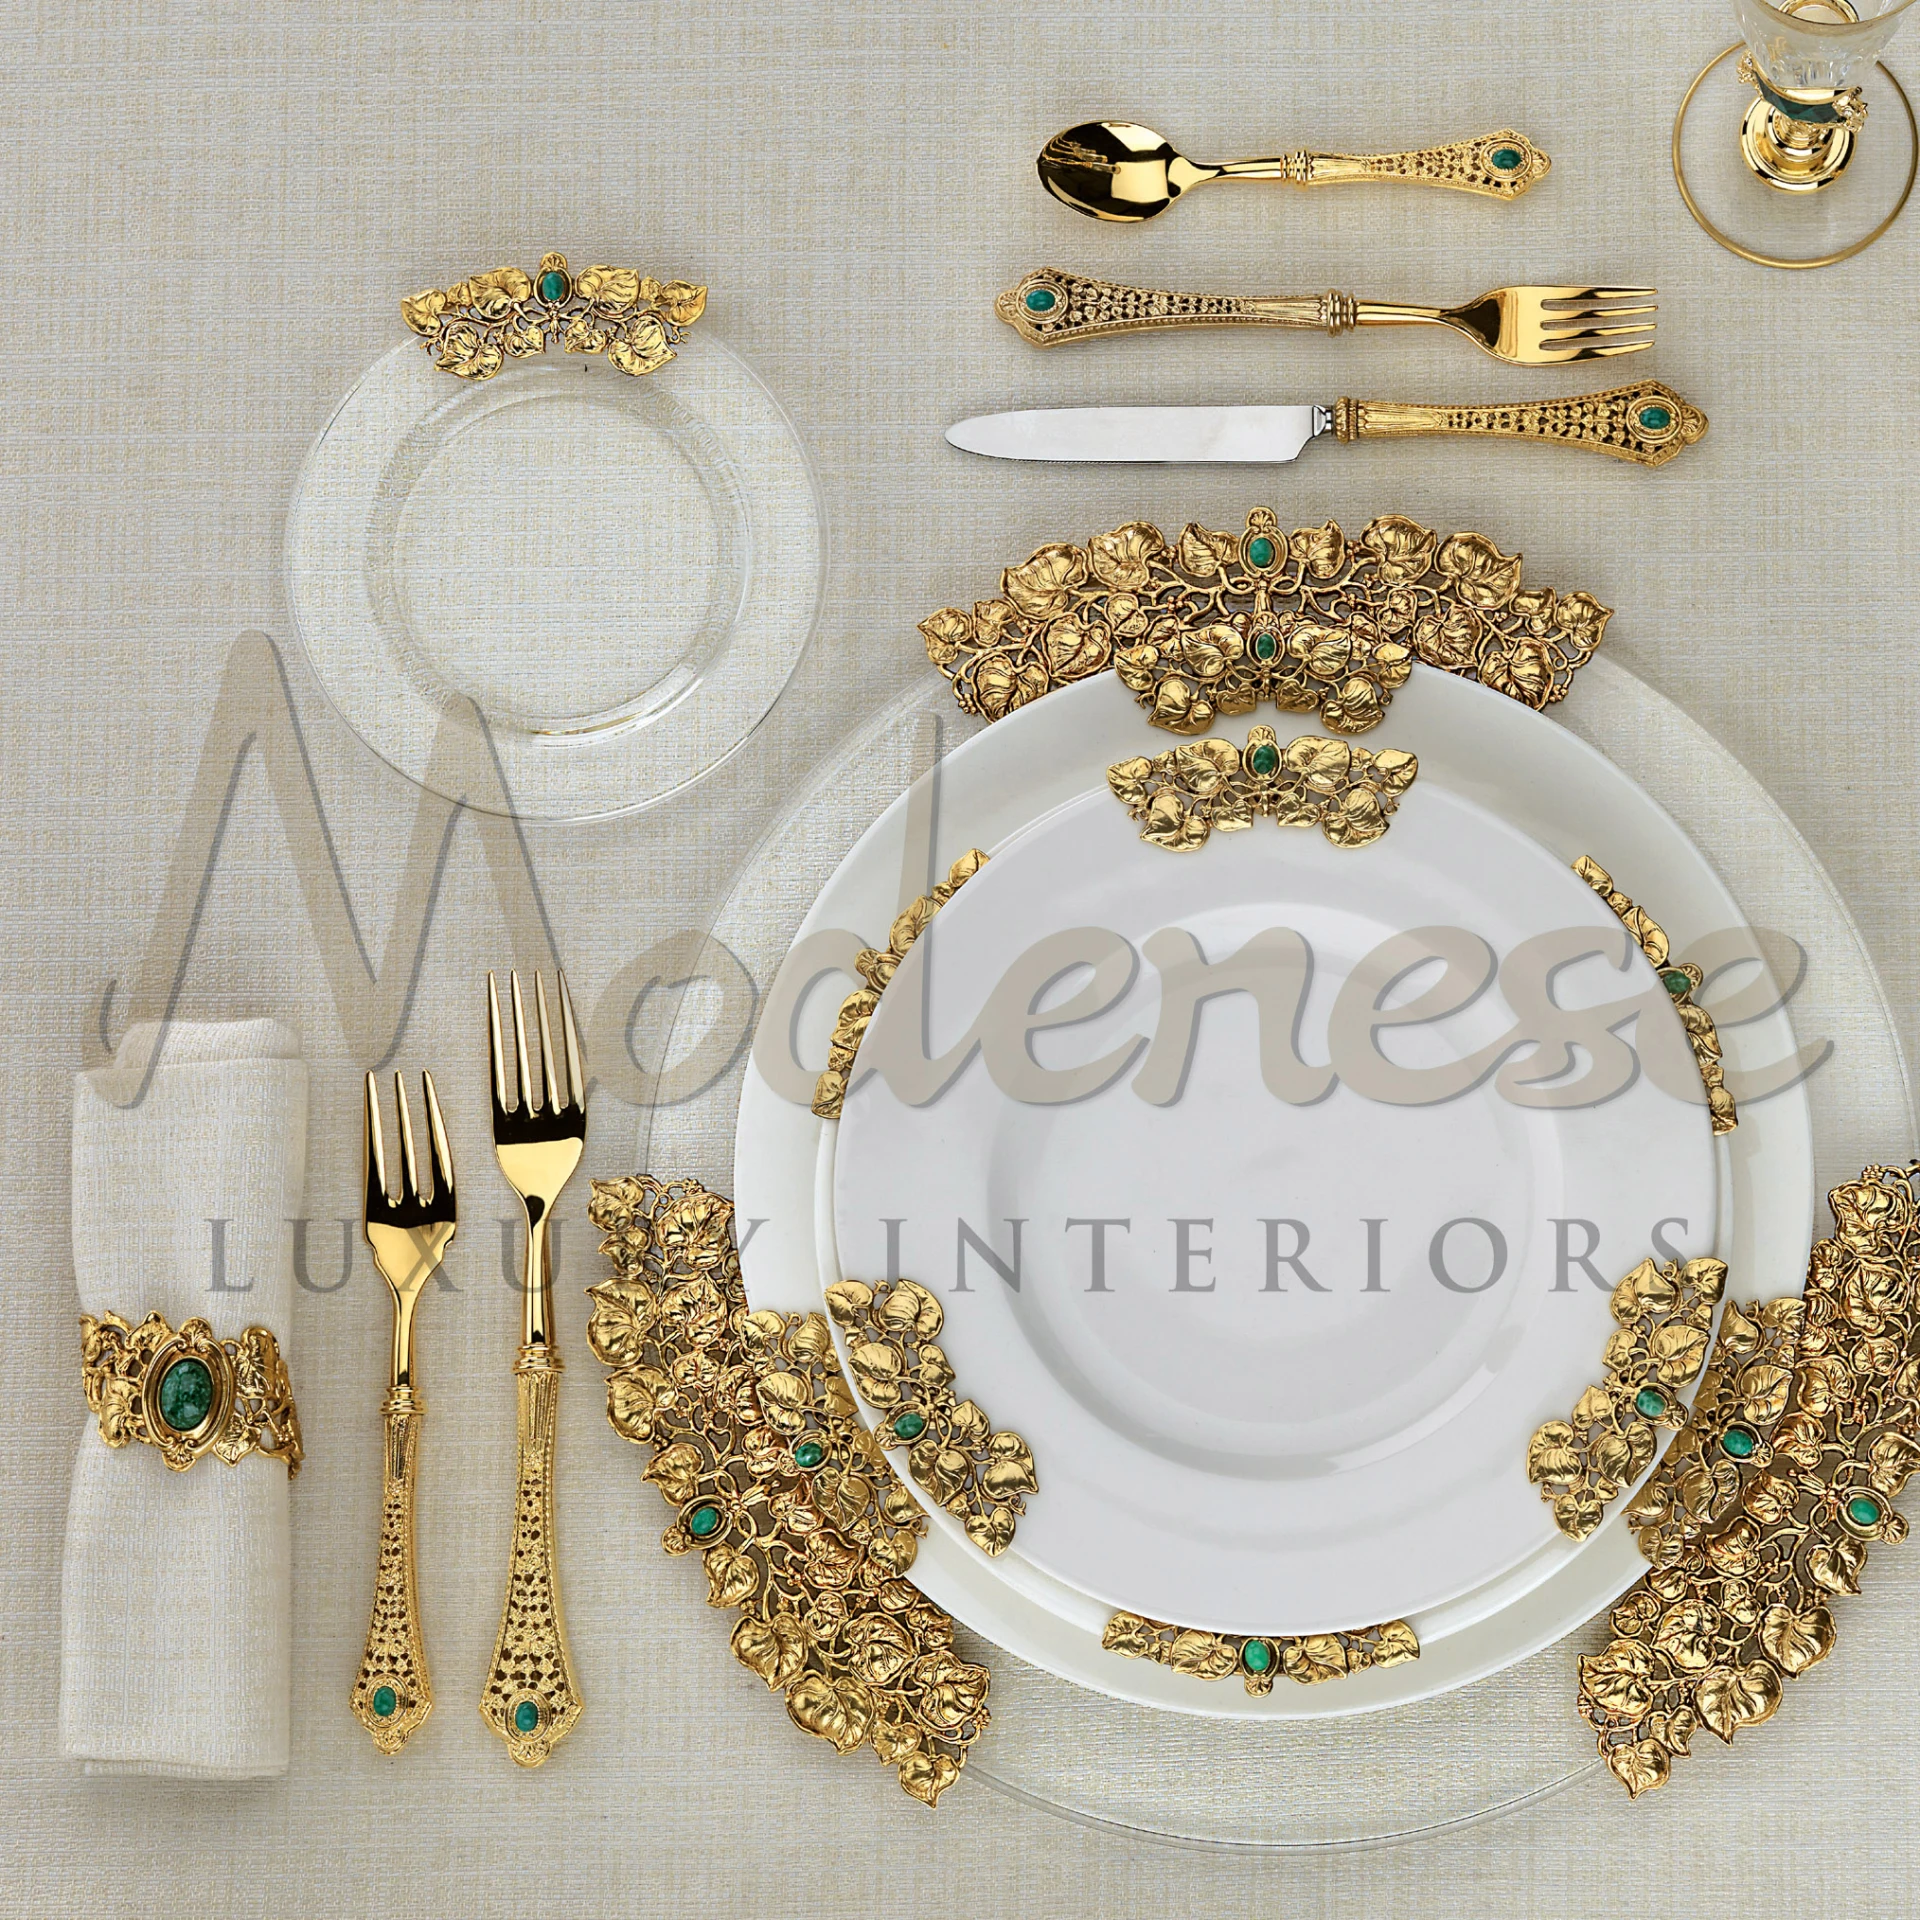 A luxurious dining set with golden ornate detailing and emerald green accents, neatly arranged on a textured surface.